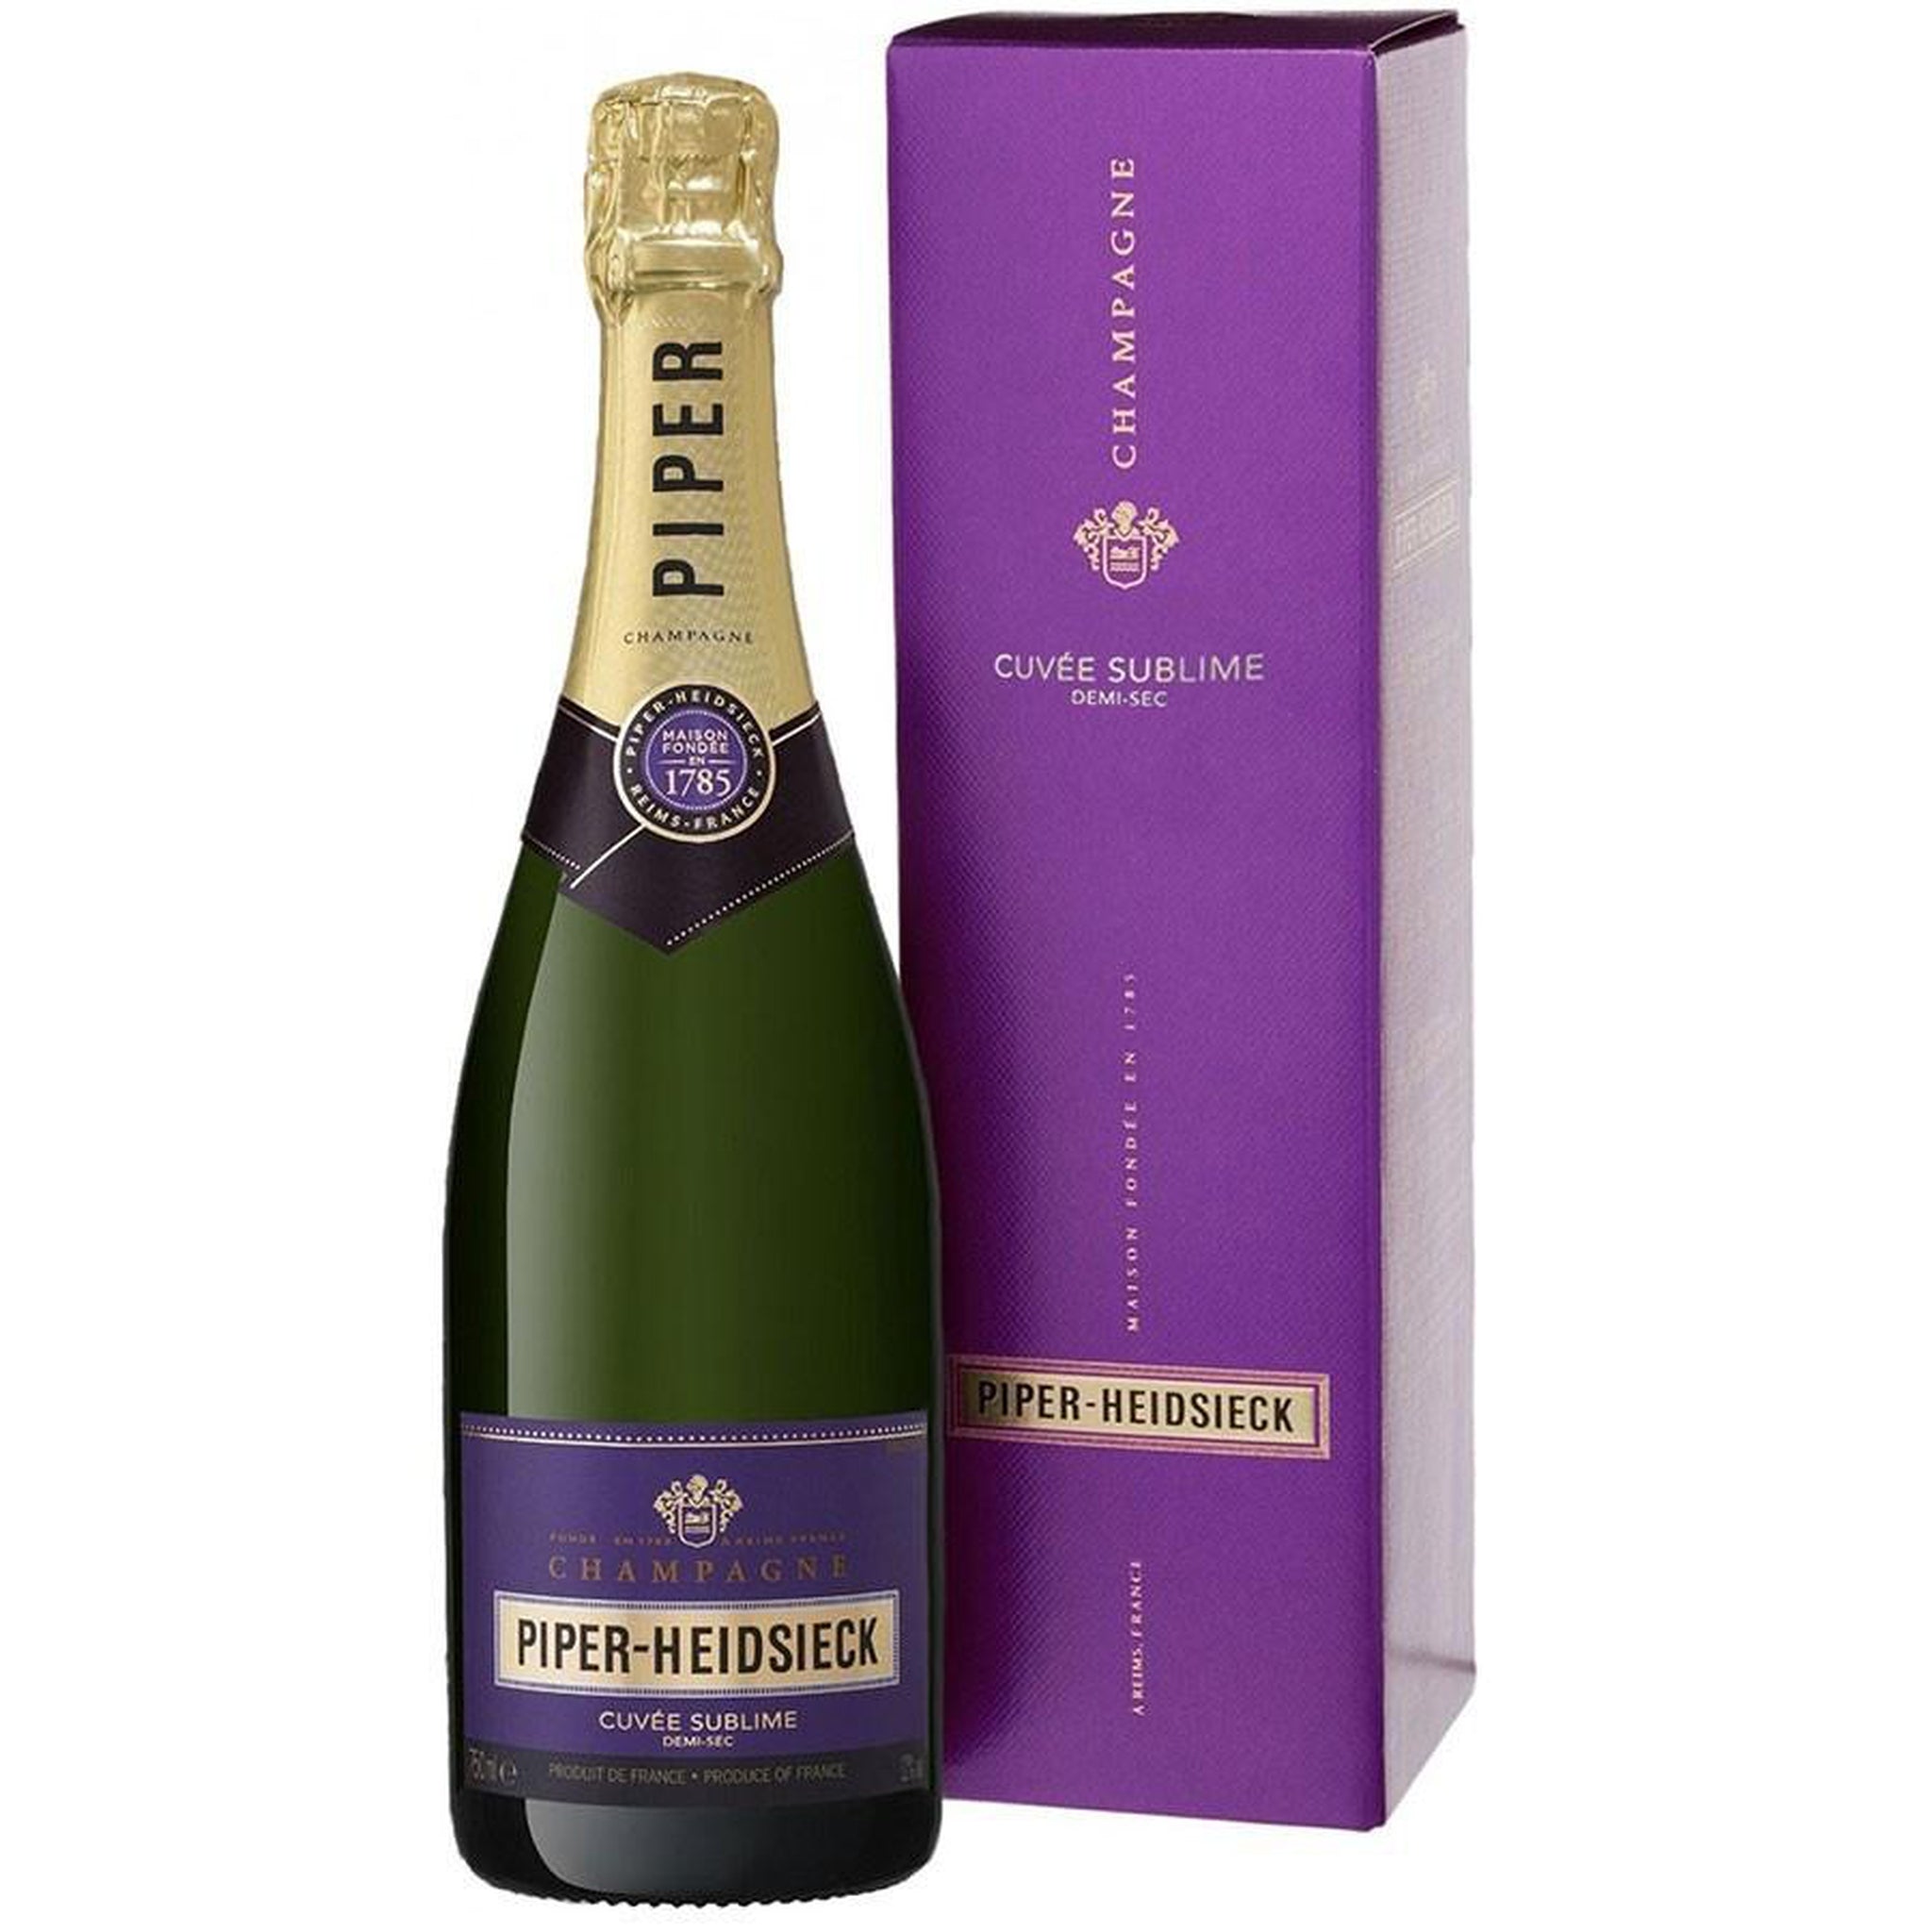 Mr. Booze.dk Piper-Heidsieck Champagne Cuvee Sublime (Giftbox) (75 cl.)